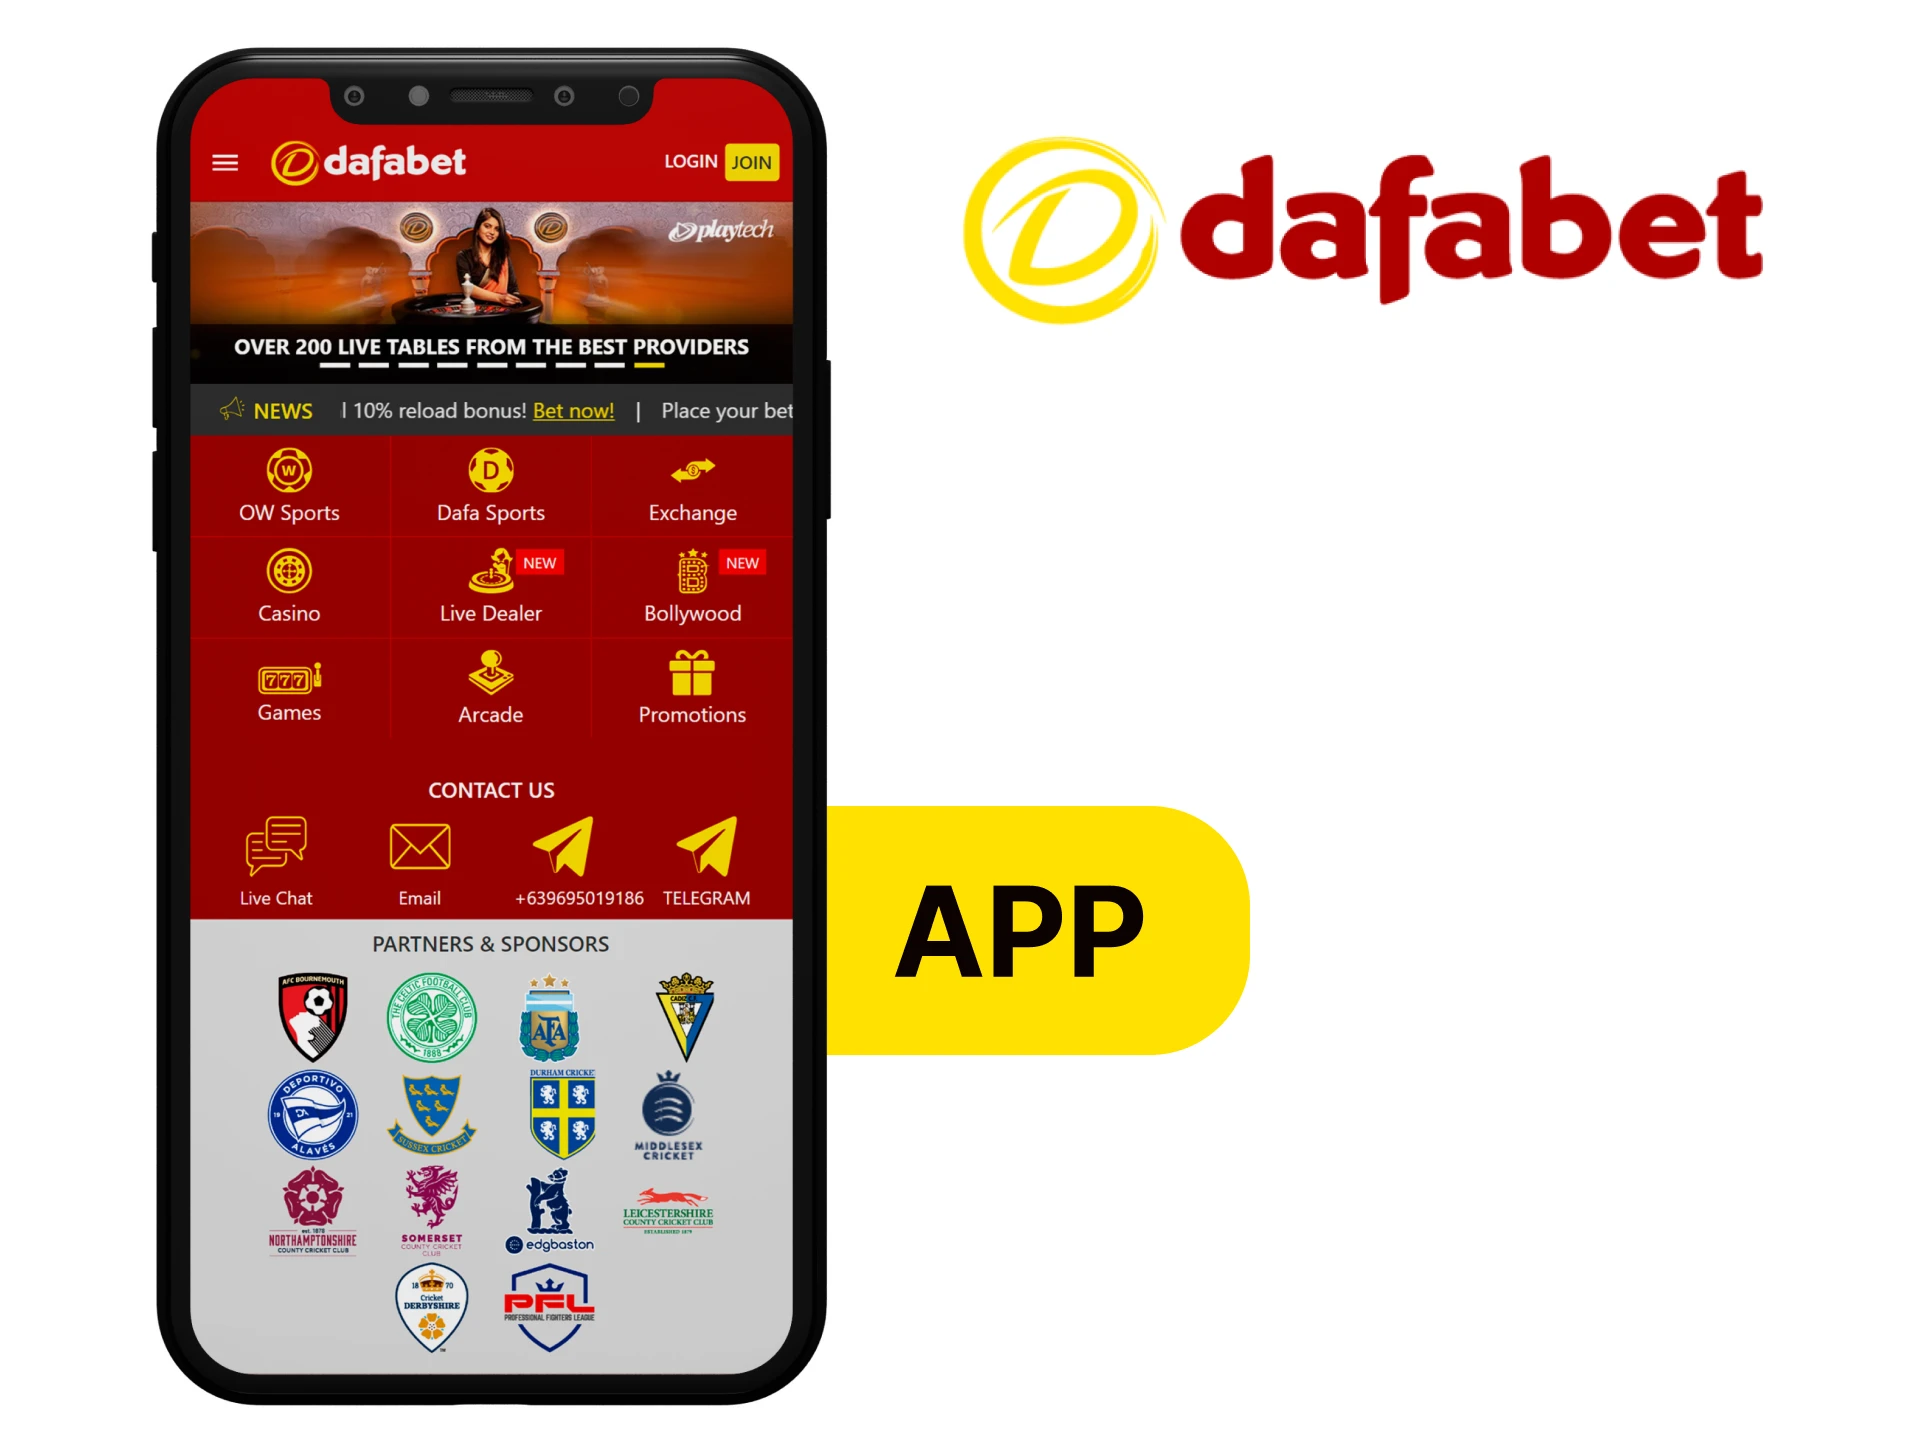 One of the largest players in the online gaming market, download the Dafabet mobile app and start betting on cricket online.